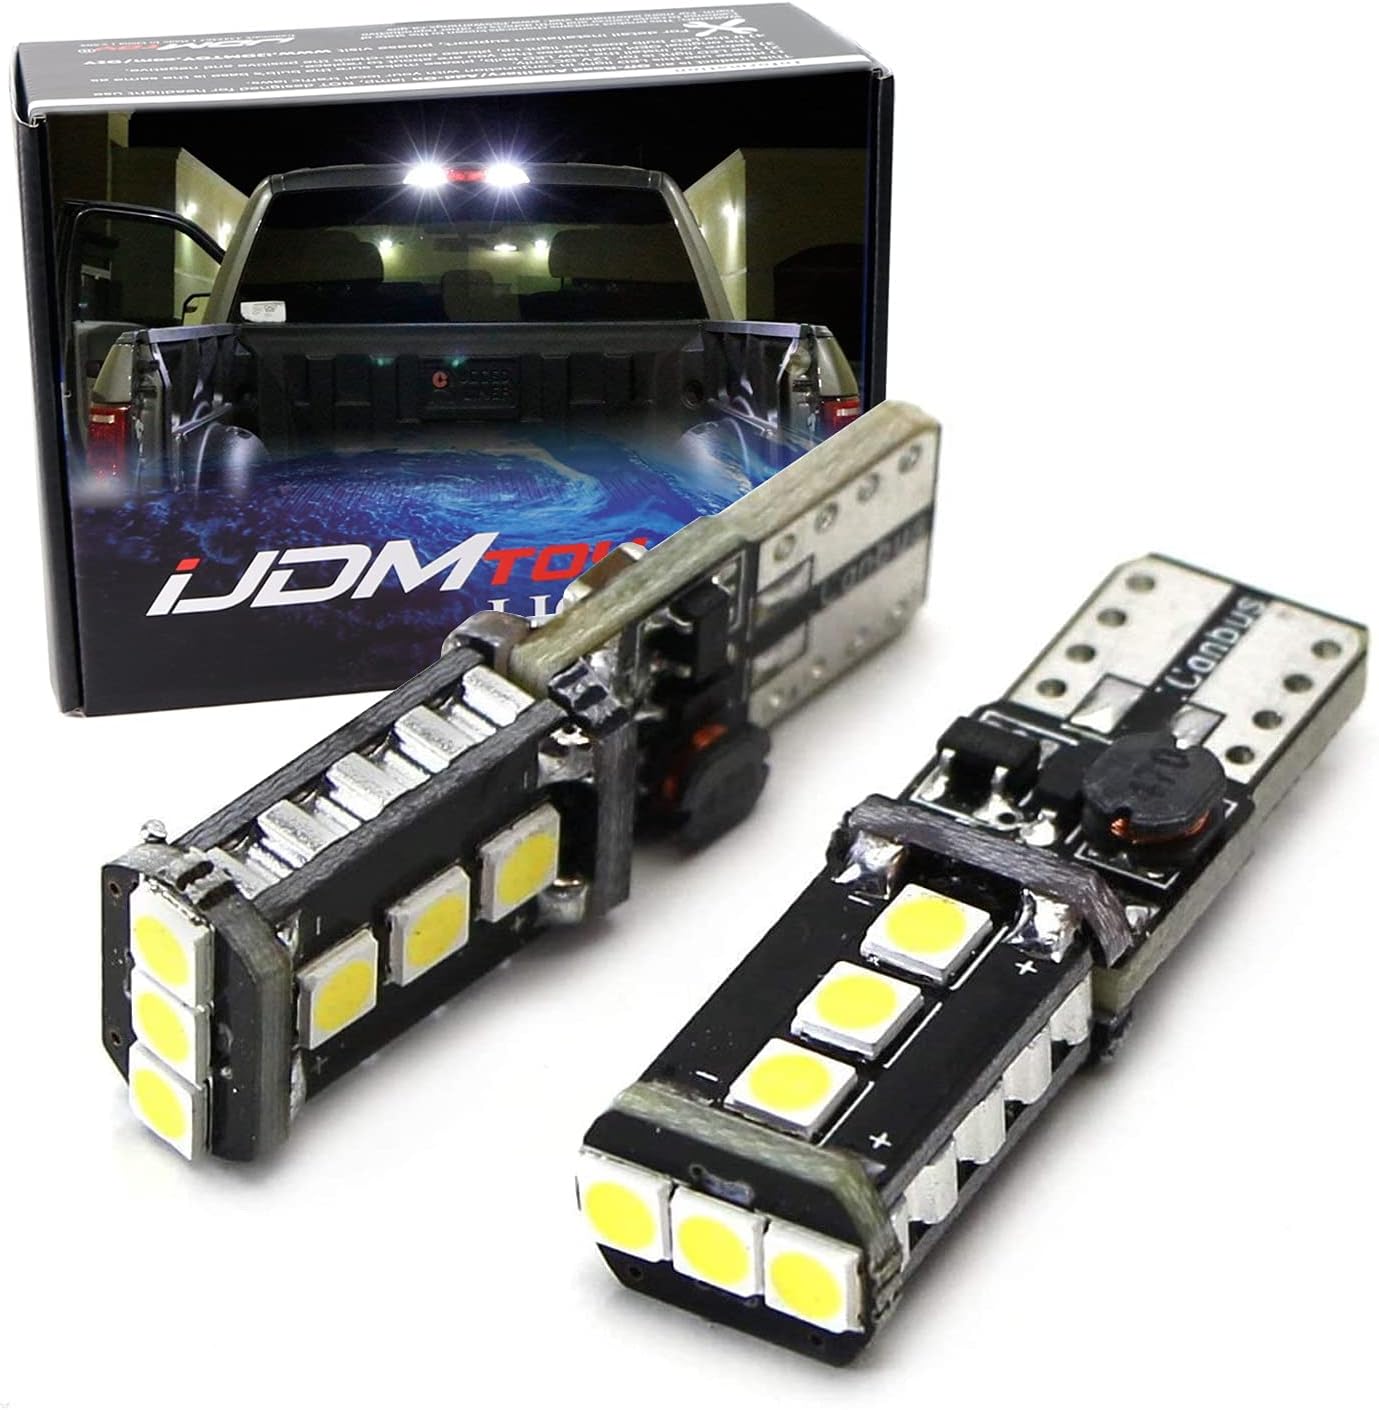 iJDMTOY Xenon White High Power 9-SMD 906 912 920 921 T15 LED Replacement Bulbs Compatible With Truck 3rd/Third Brake Lamp Cargo Illumination Lights